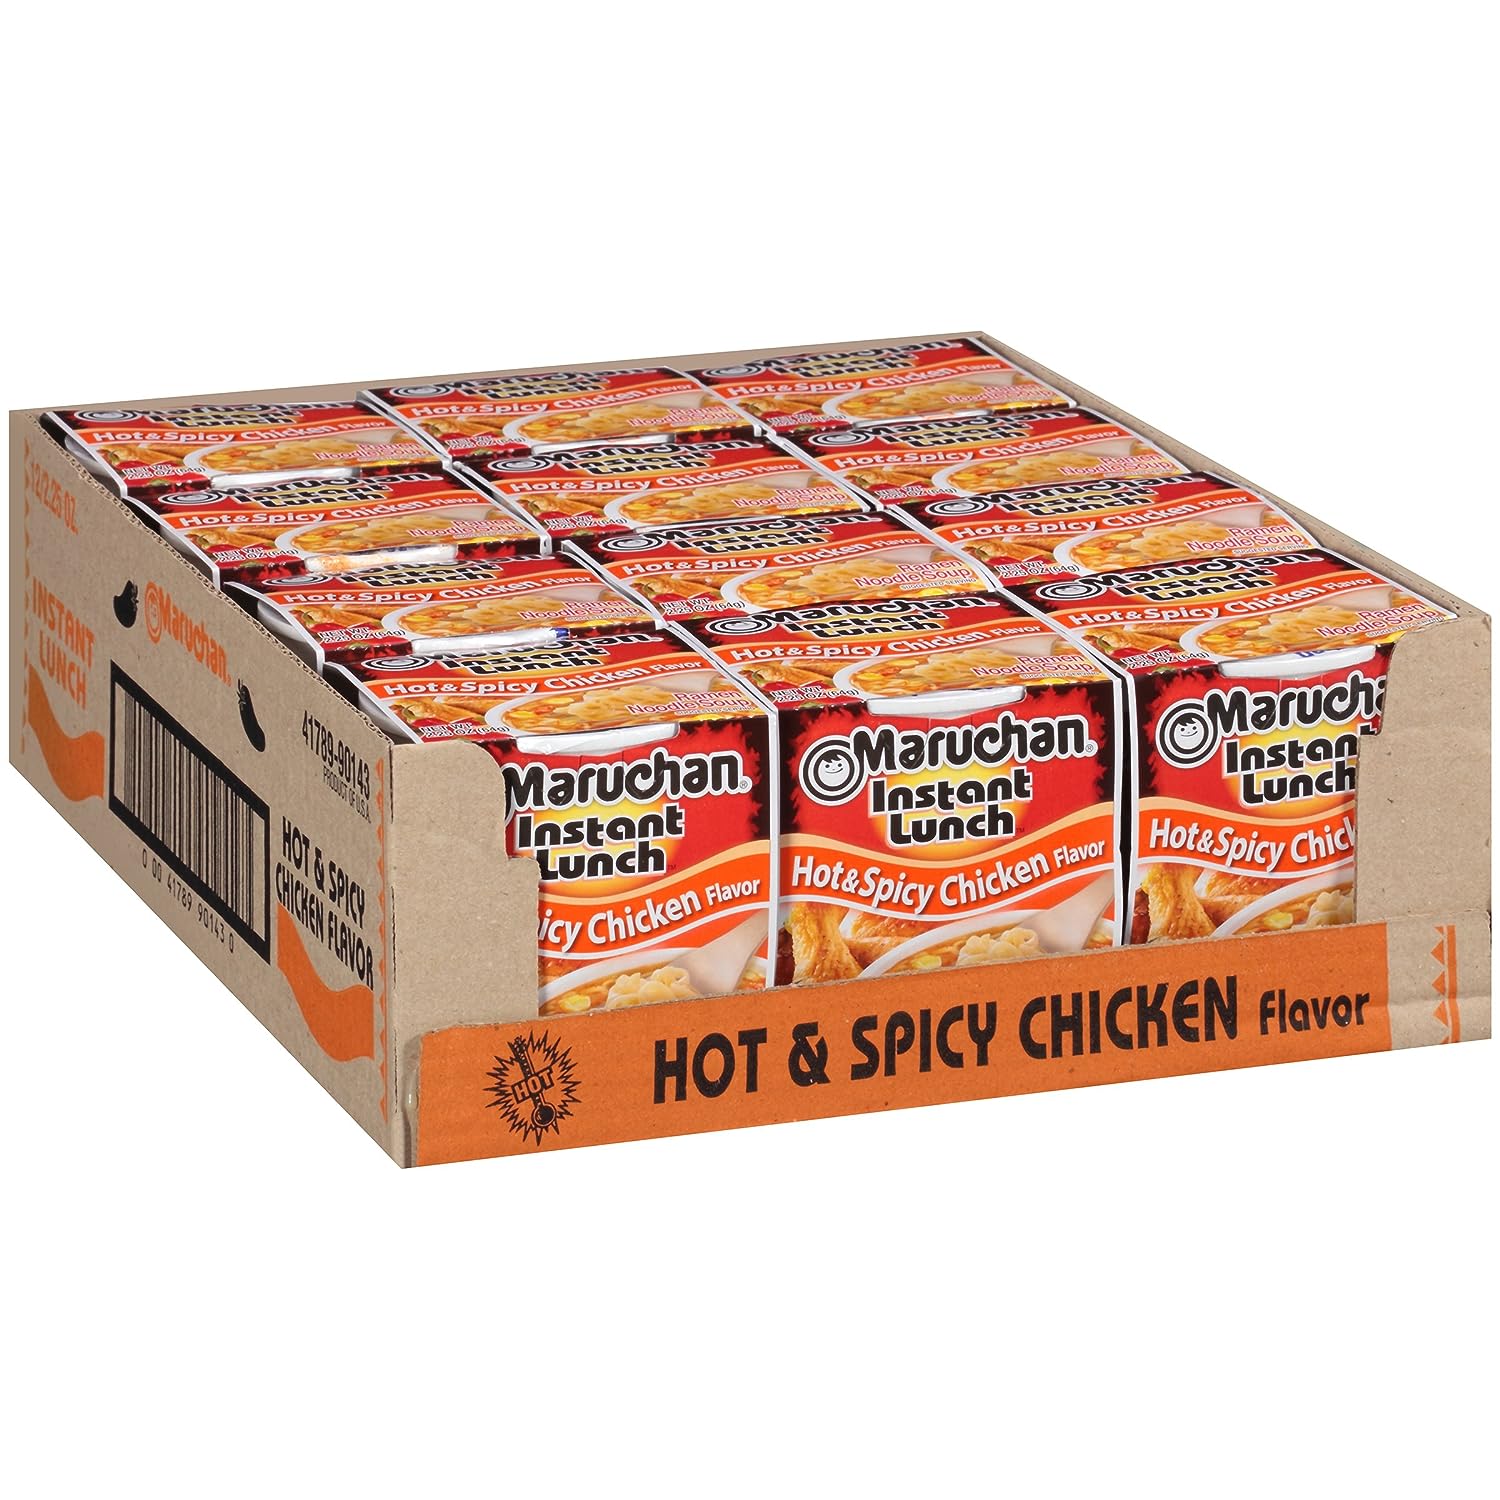 Maruchan Instant Lunch Hot & Spicy Chicken, Ramen Noodle Soup, Microwaveable Meal, 2.25 Oz, 12 Count